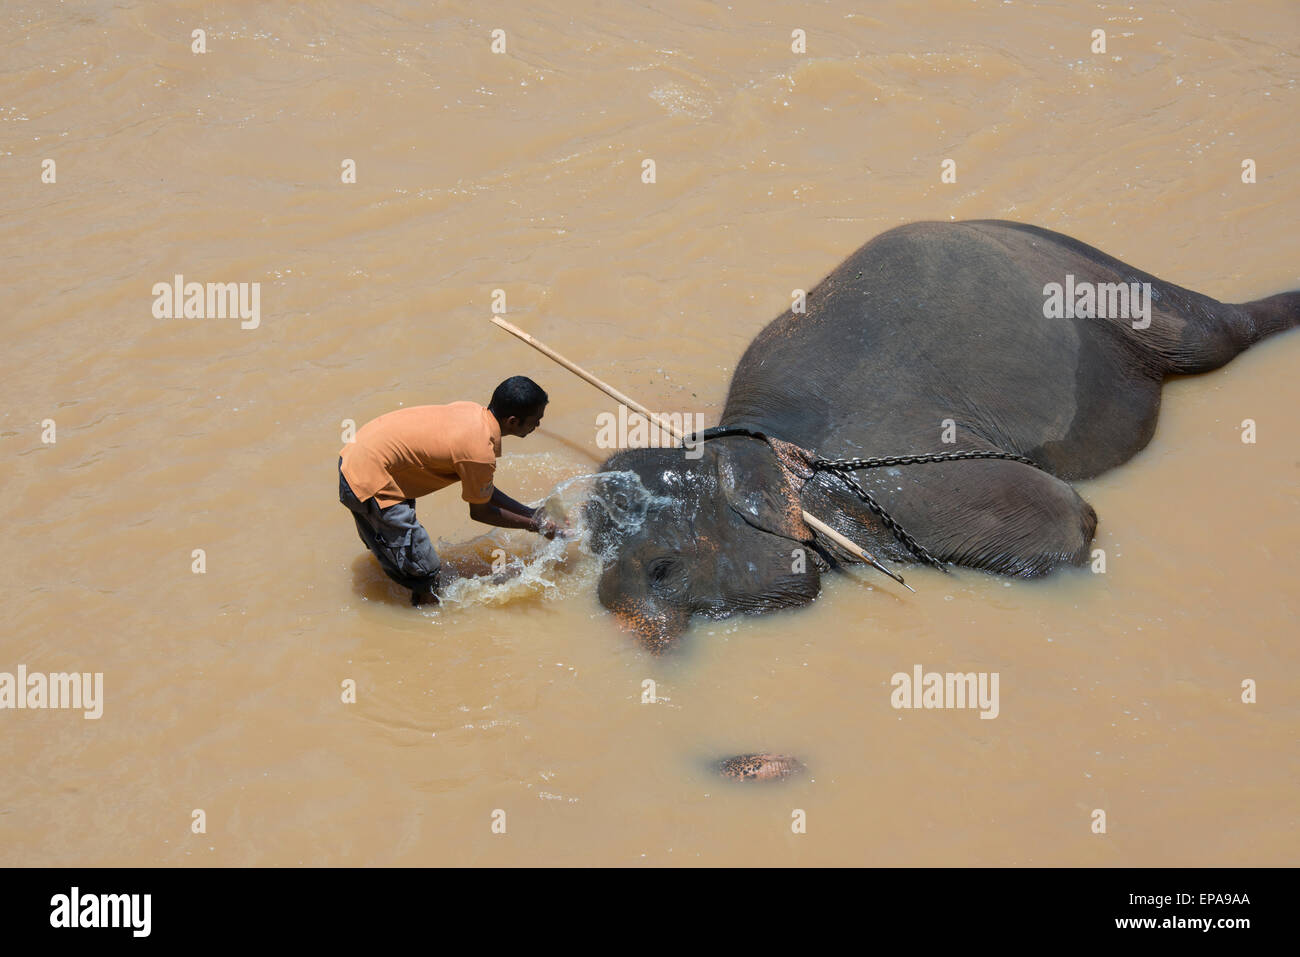 Sri Lanka, Pinnawela Elephant Orphanage, est. in 1975 by the Wildlife Department. Mahout (care giver/trainer) cooling off. Stock Photo